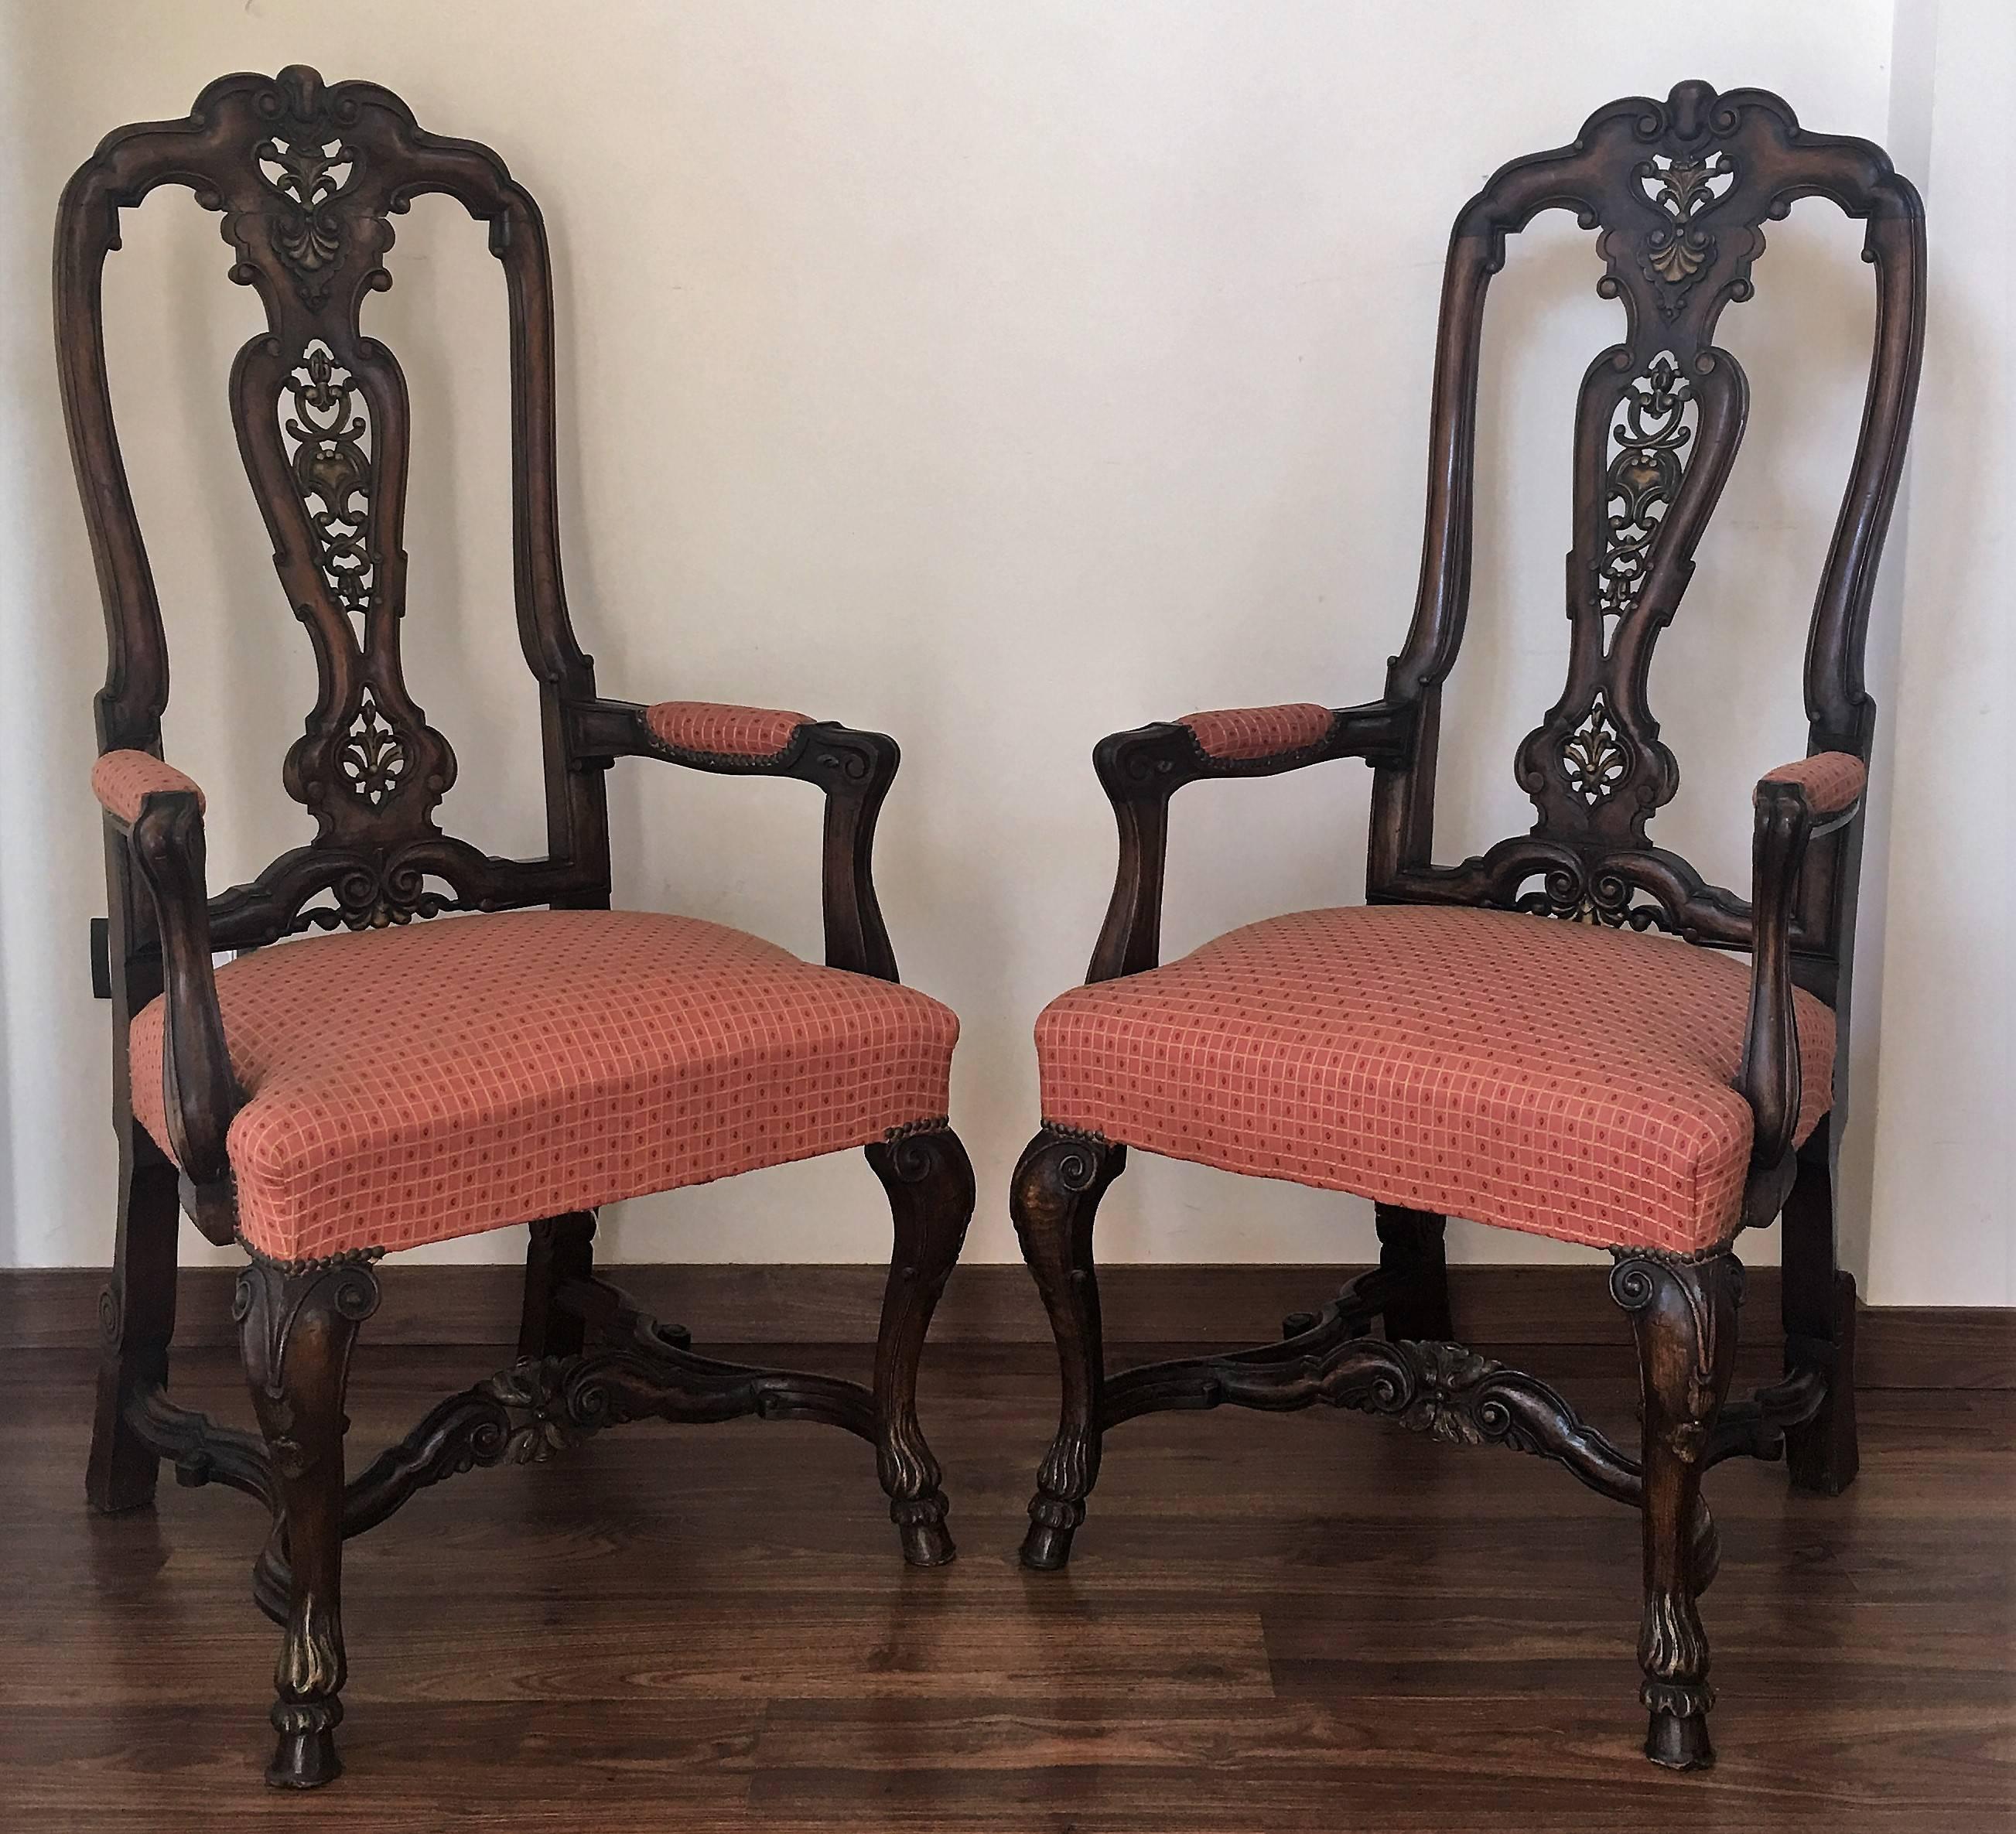 1920s burl walnut Queen Anne style pair of armchairs
Burr walnut tops, walnut carcass and cabriole legs.

